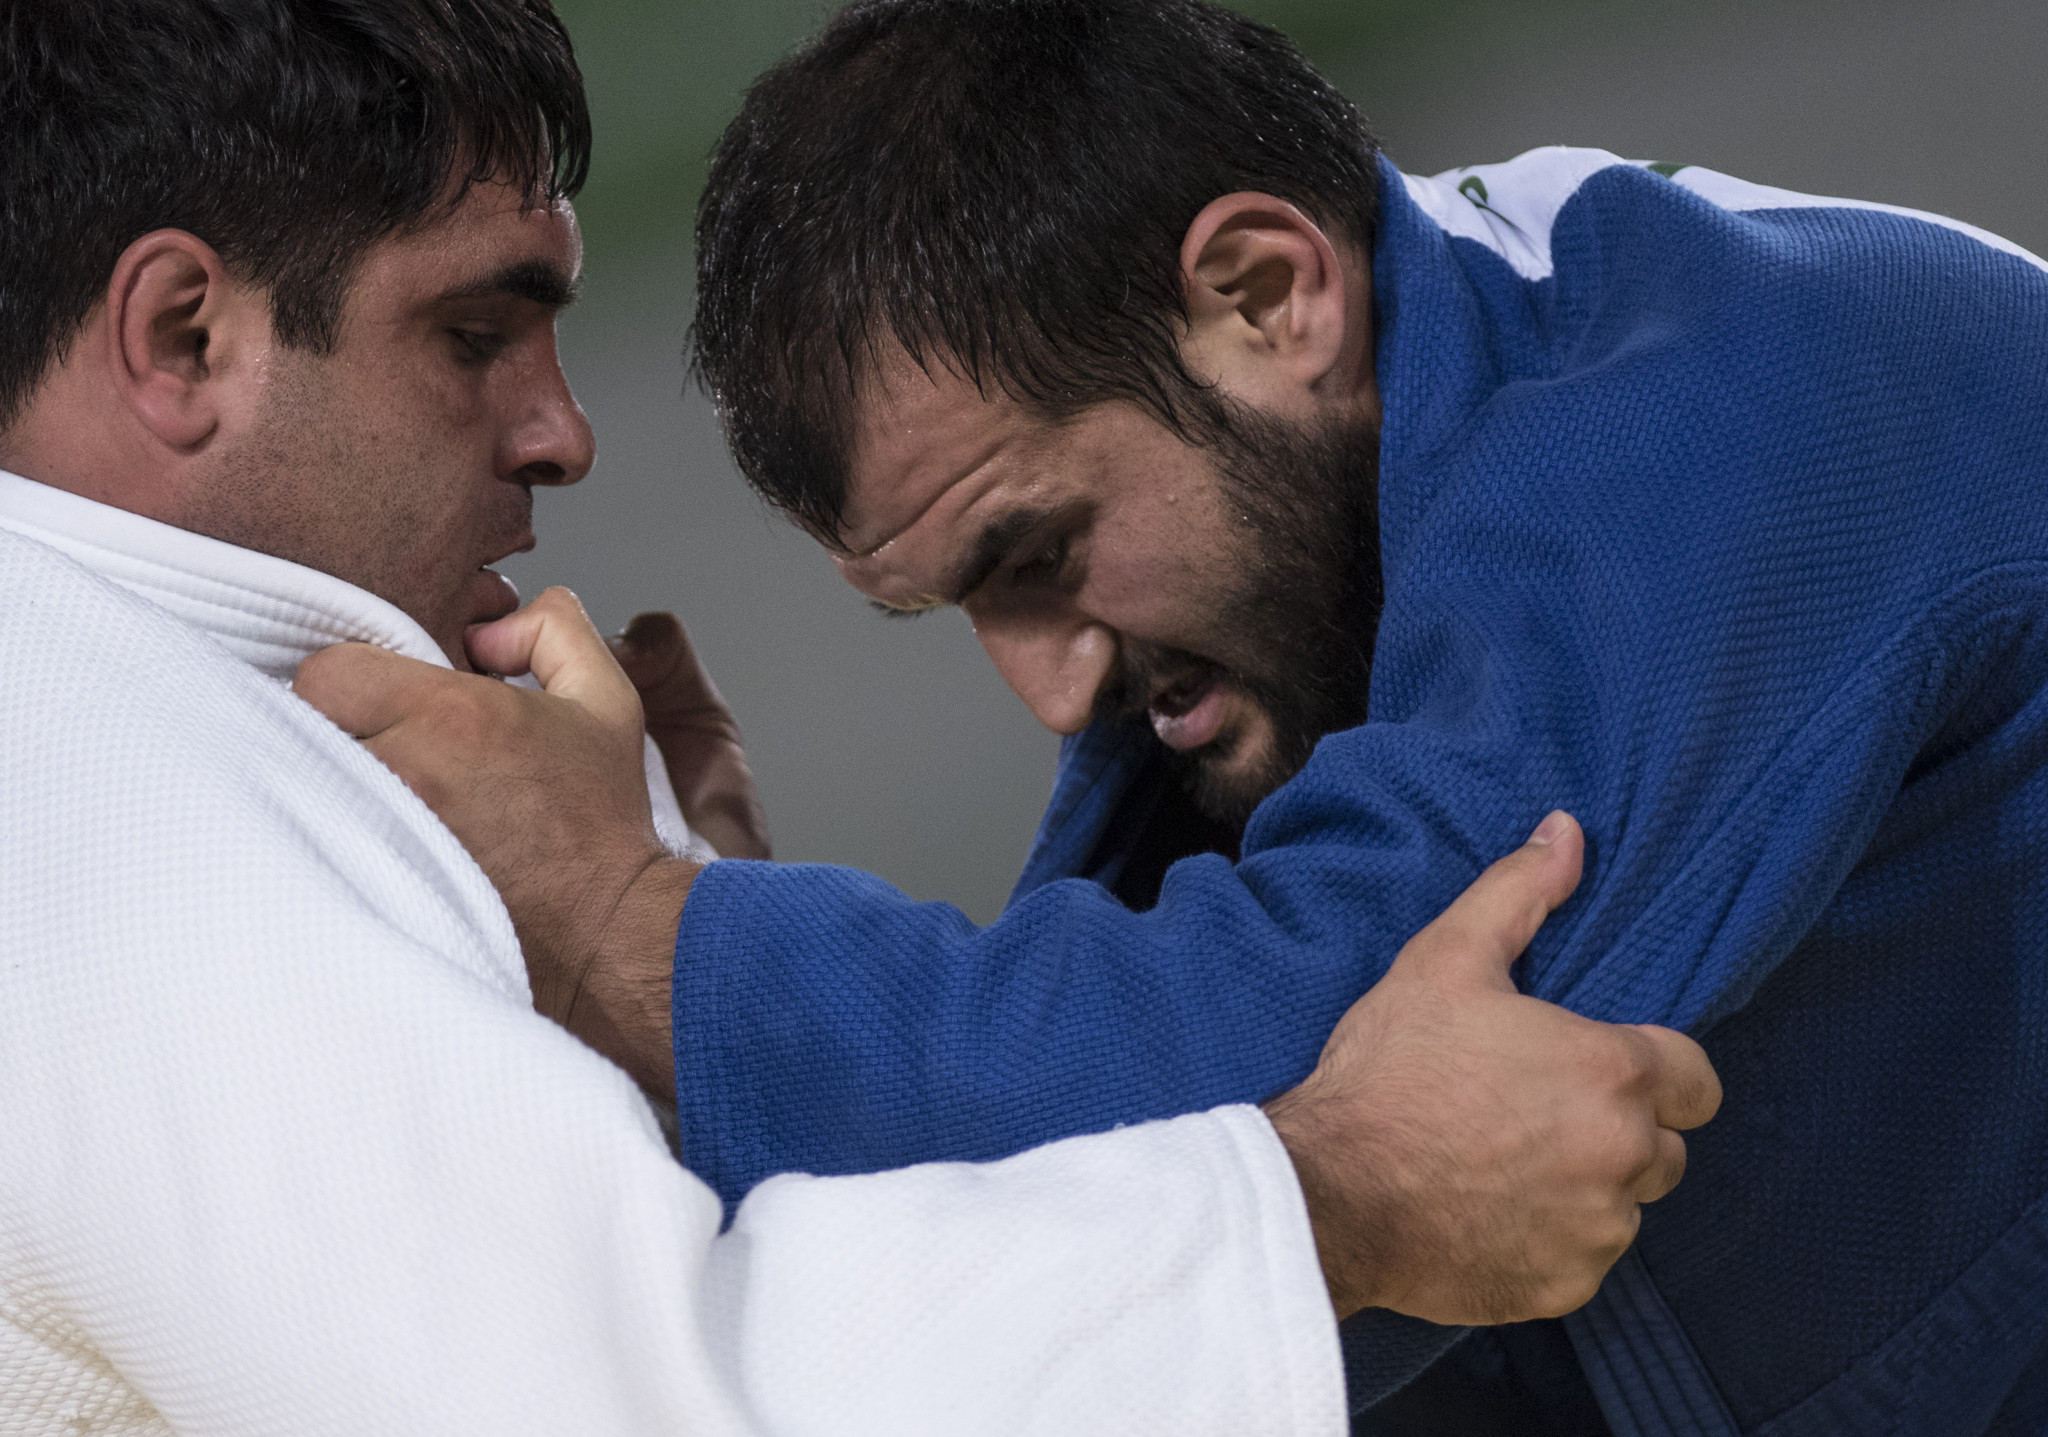 Uzbekistan claim two more golds to top medal table at IBSA Judo Grand Prix in Baku